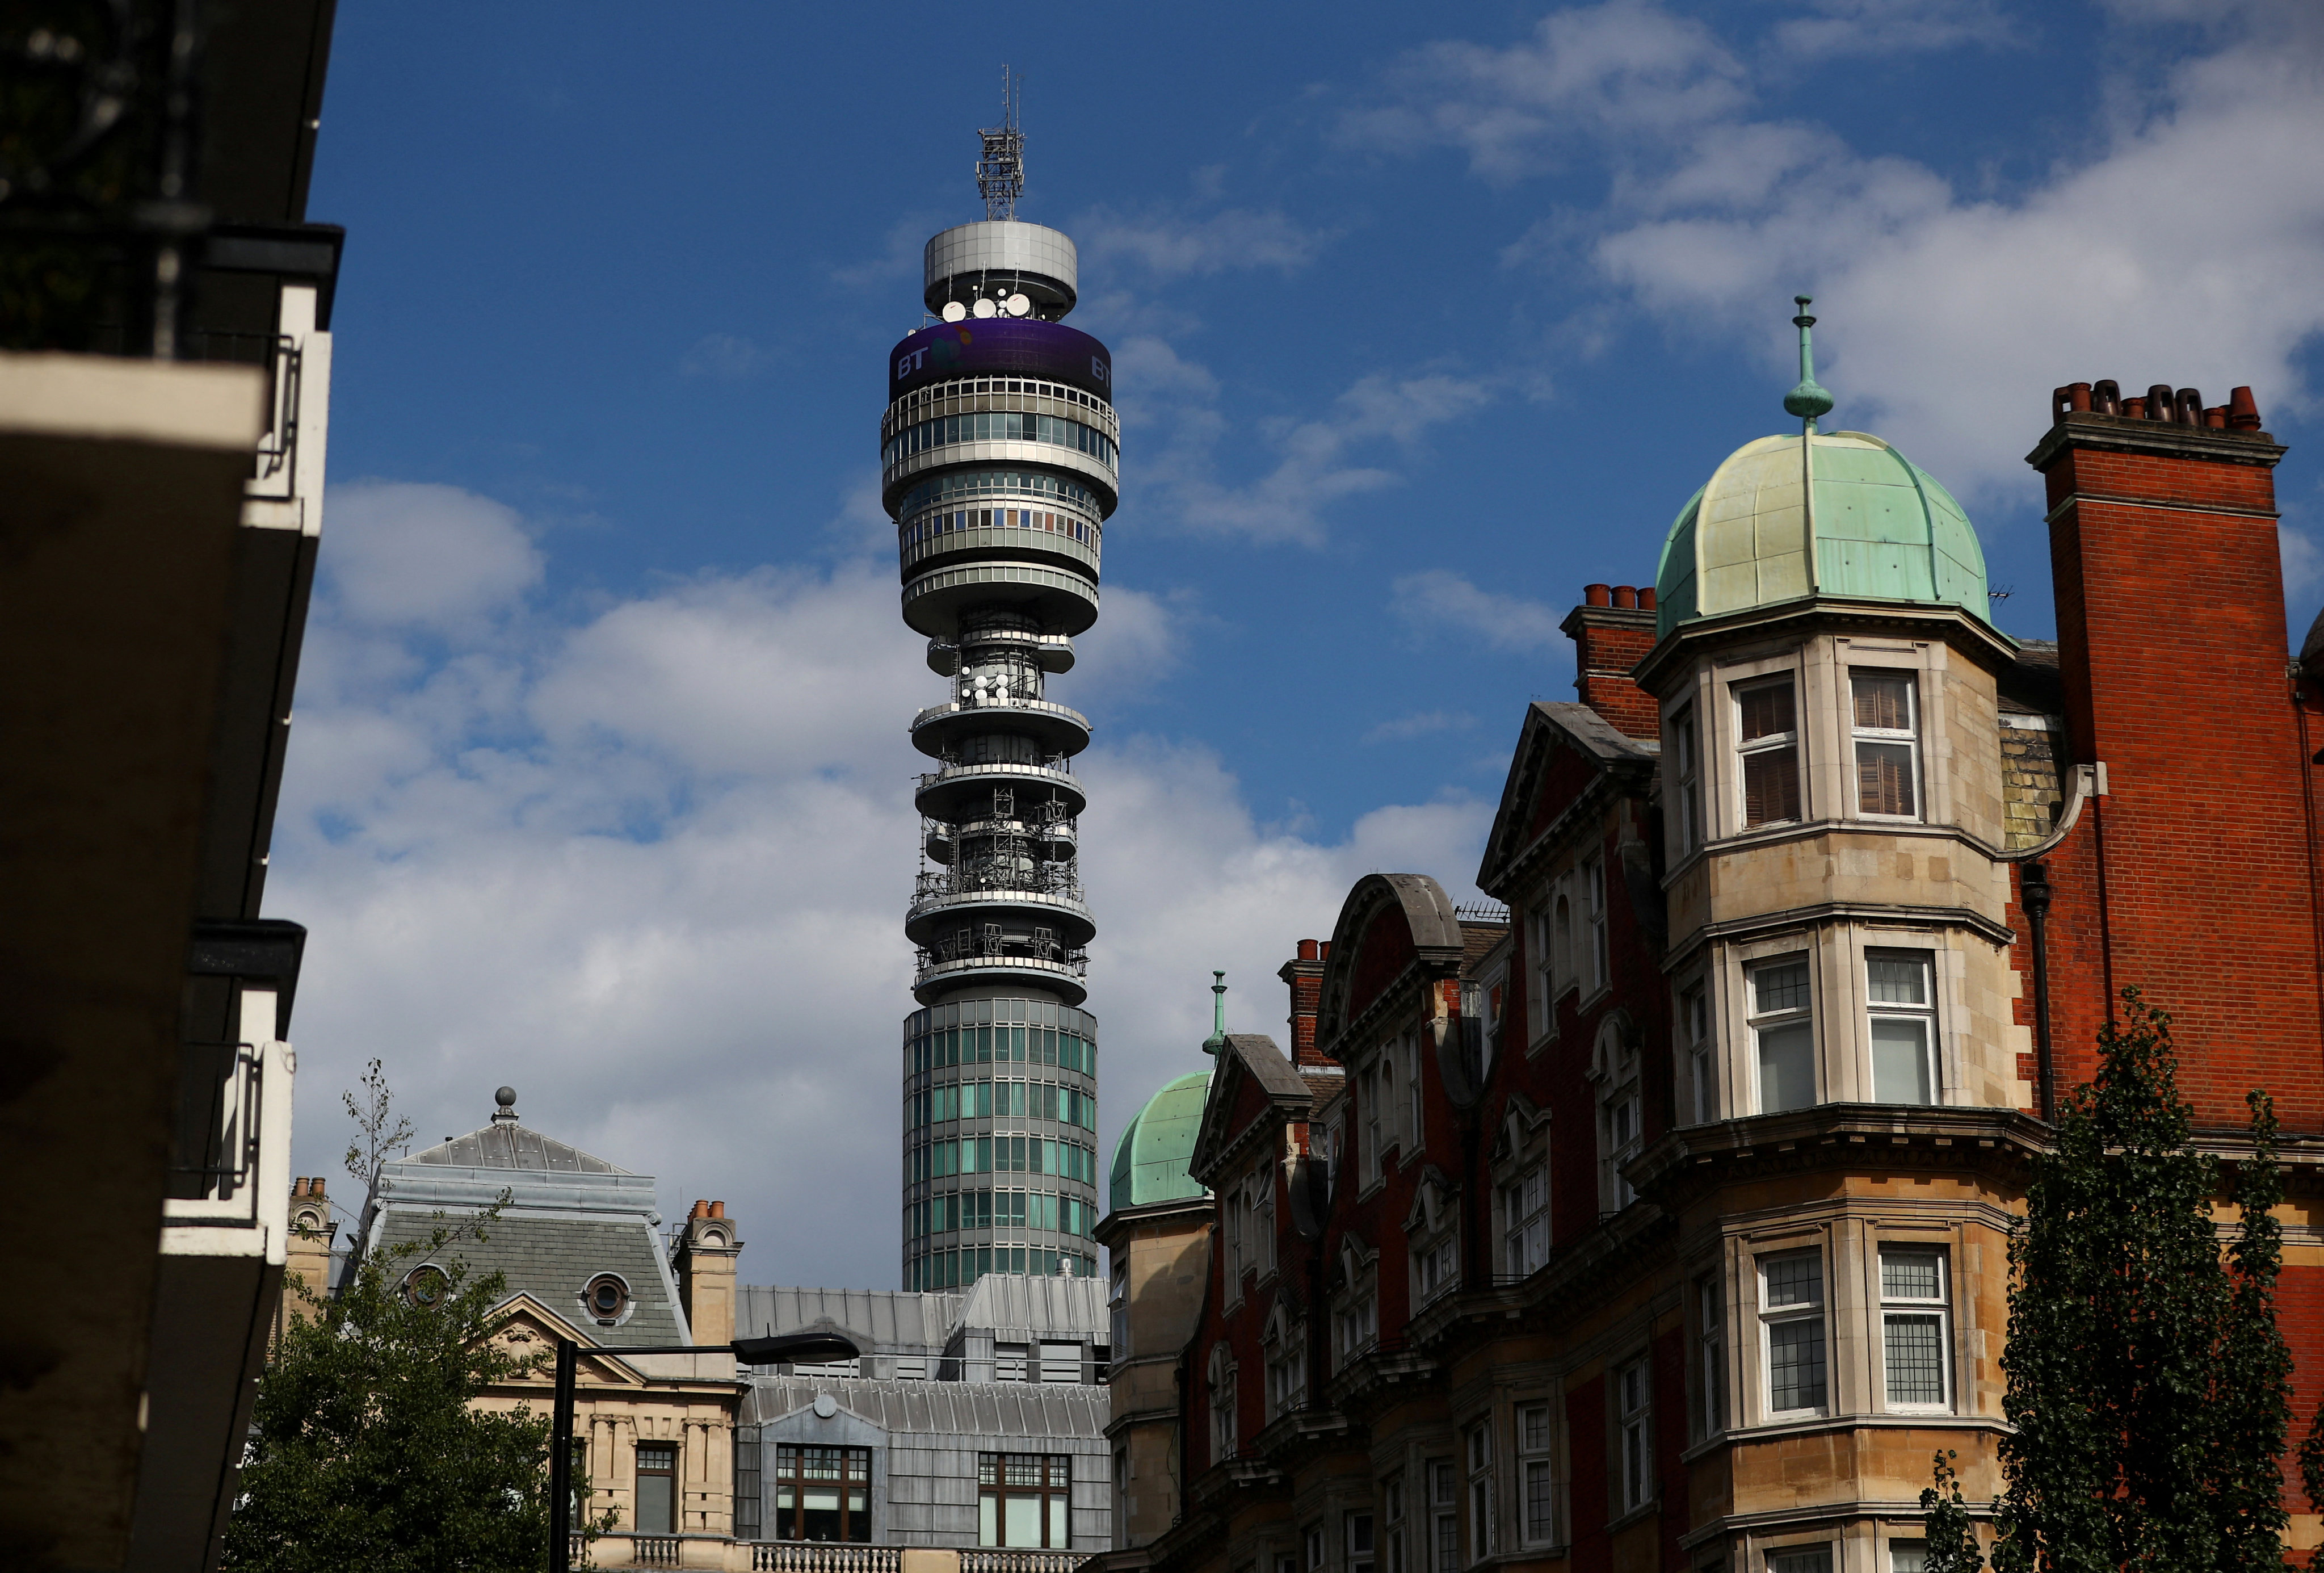 The BT Tower communications tower will get a new lease on life and be converted into a hotel, after the owners sold the structure. Photo: Reuters